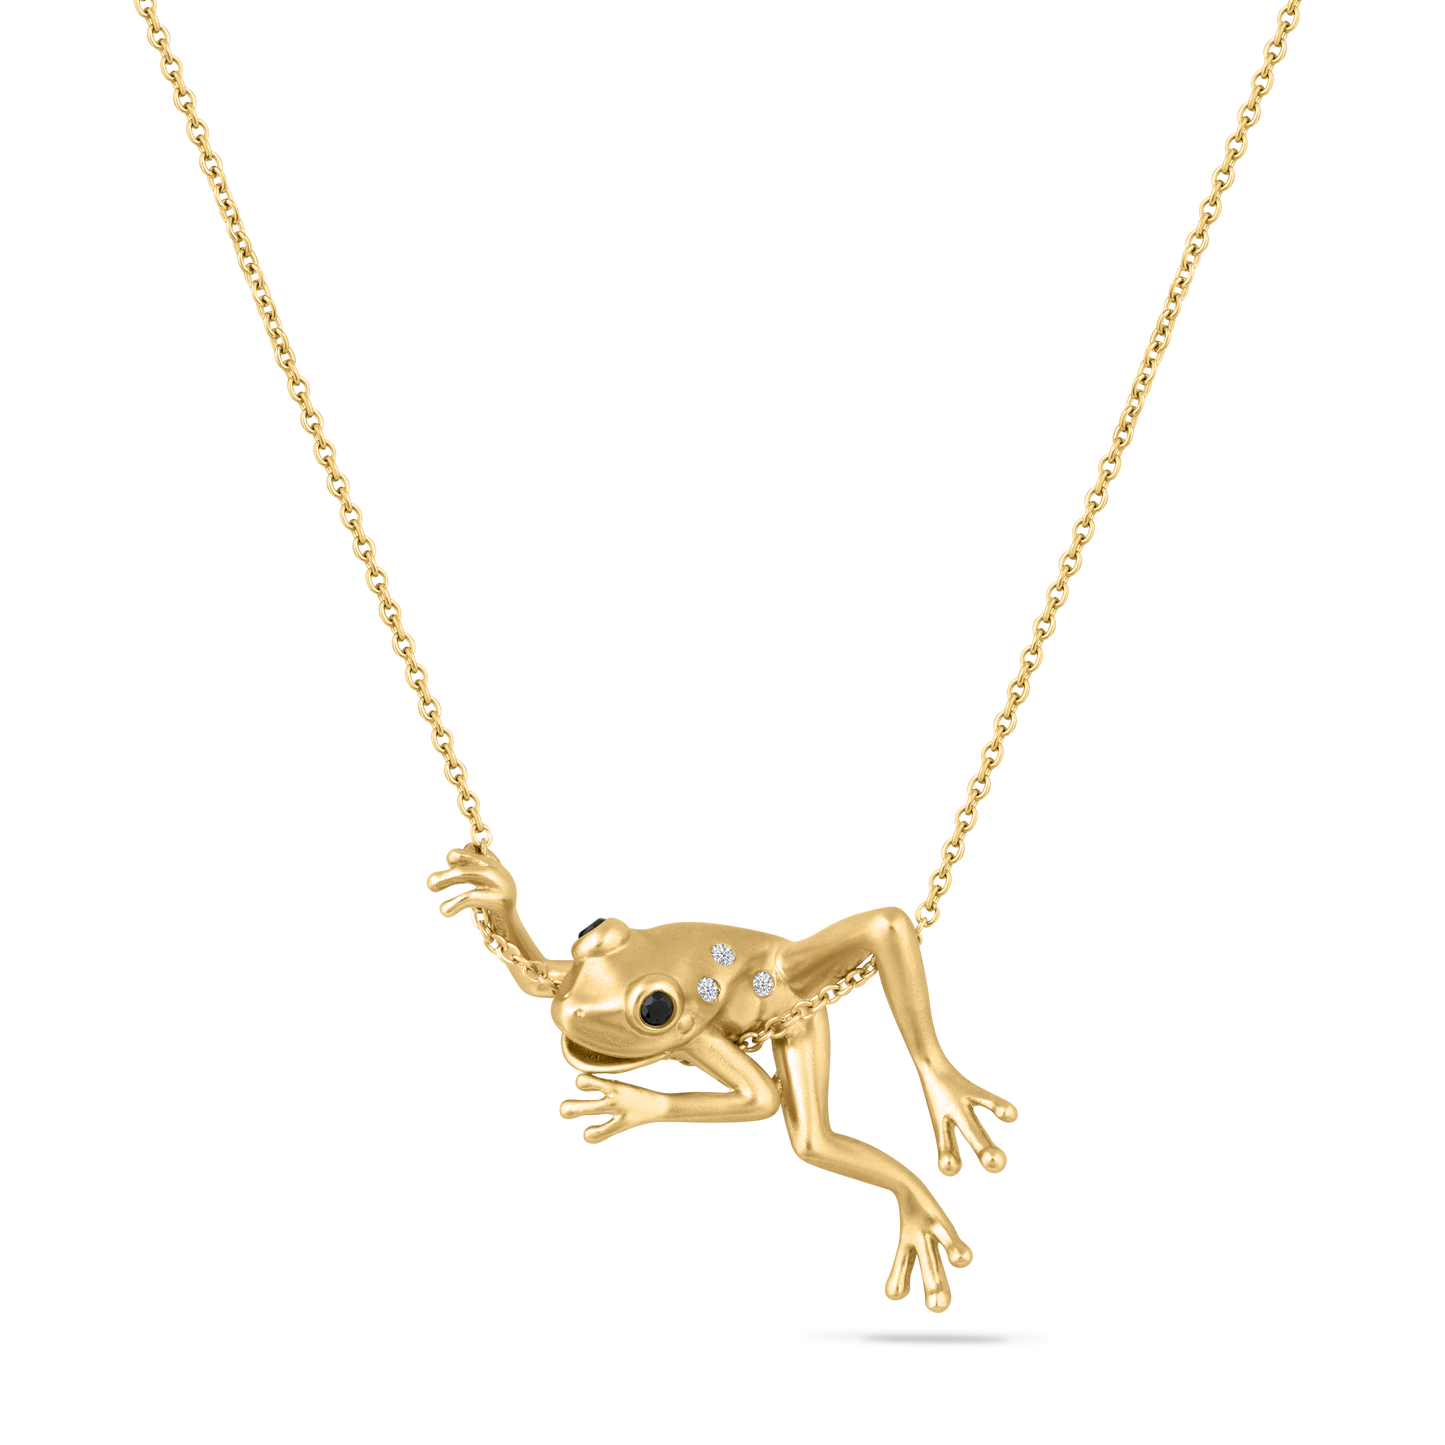 14K FROG PENDANT WITH 3 DIAMONDS 0.016CTAND 2 BLACK DIAMONDS 0.038CT ON 18 INCHES CABLE CHAIN